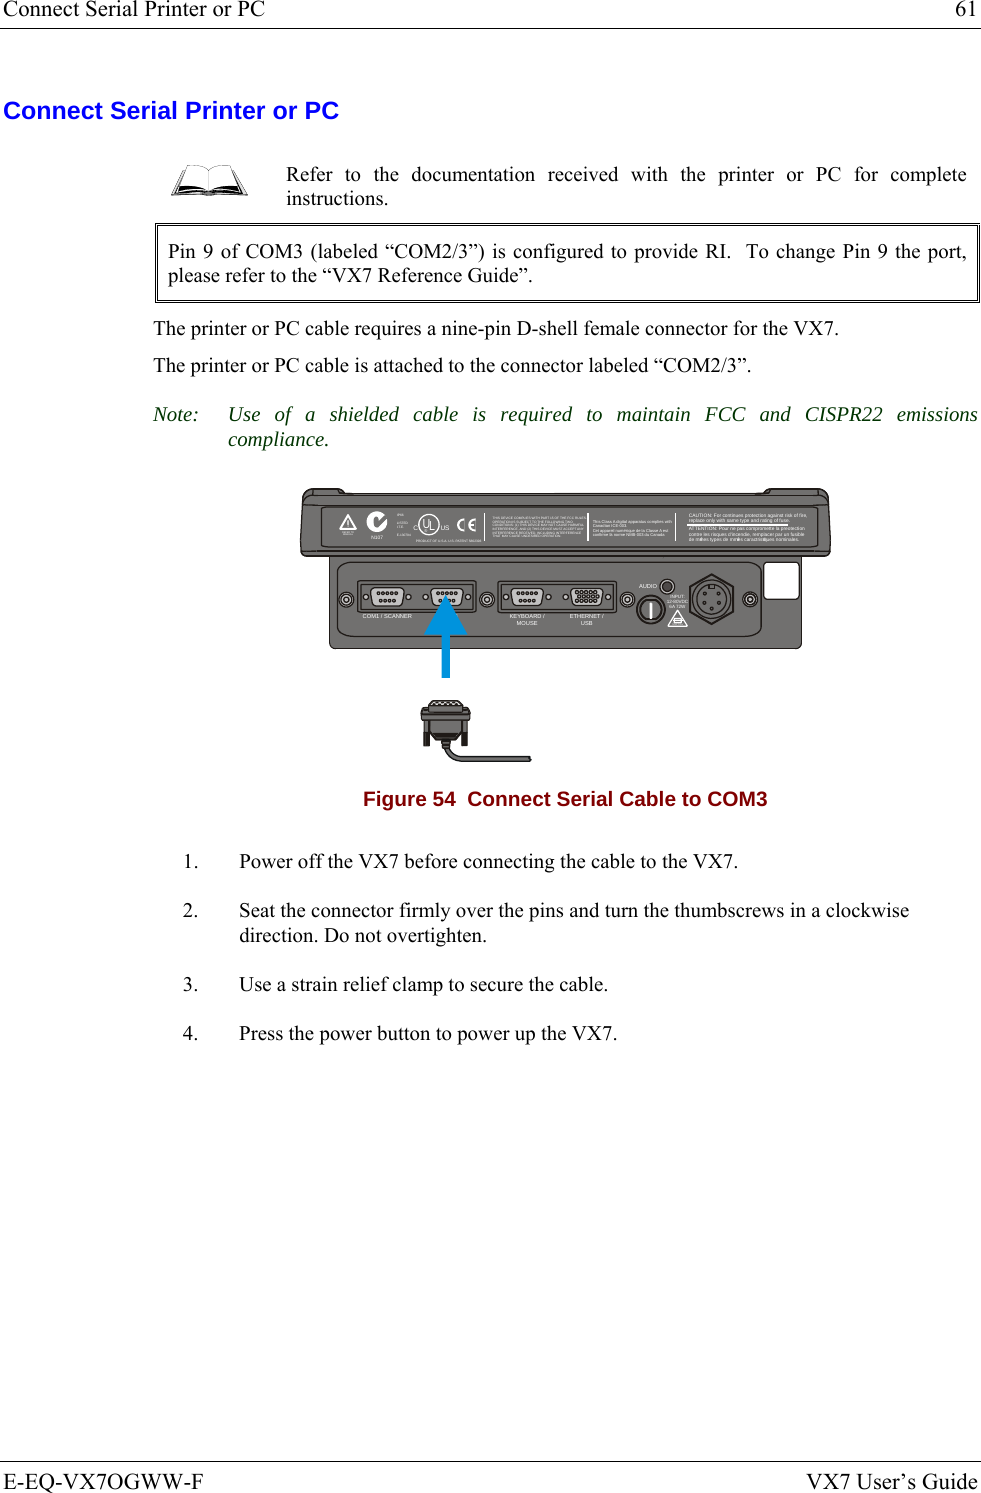 Connect Serial Printer or PC  61 E-EQ-VX7OGWW-F  VX7 User’s Guide Connect Serial Printer or PC  Refer to the documentation received with the printer or PC for complete instructions. Pin 9 of COM3 (labeled “COM2/3”) is configured to provide RI.  To change Pin 9 the port, please refer to the “VX7 Reference Guide”. The printer or PC cable requires a nine-pin D-shell female connector for the VX7.  The printer or PC cable is attached to the connector labeled “COM2/3”. Note:  Use of a shielded cable is required to maintain FCC and CISPR22 emissions compliance. T10A, 125VINPUT:12-80VDC6A 72WAUDIOETHERNET /USBKEYBOARD /MOUSECOM2/3COM1 / SCANNERN107REFER TOMANUALIP66LISTEDI.T.E.E-130794CPRODUCT OF U.S.A. U.S. PATENT 5862393USUL®THIS DEVICE COMPLIES WITH PART 15 OF THE FCC RULES.OPERATION IS SUBJECT  TO THE FOLLOWING TWOCONDITIONS: (1) THIS DEVICE MAY NOT CAUSE HARMFULINTERFERENCE , AND (2) THIS  DEVICE MUST ACCE PT ANYINTERFERENCE RECEIVED, INCLUDING INTERFERENCETHAT MAY CAUSE UNDESIRED OPERATION.This Class A digital apparatus complies withCanadian ICE-003.Cet appareil num de la Classe A estconfirme l ériqueorme NMB-003 du Canadaà nCAUTION: For continues protection against risk of fire, replace only with same type and rating of fuse.ATTENTION: Pour ne pas compromette la preotectioncontre les risques d&apos;incendie, remplacer par un fusiblede mmes types de mmes caractristques nominales.êêé Figure 54  Connect Serial Cable to COM3 1.  Power off the VX7 before connecting the cable to the VX7. 2.  Seat the connector firmly over the pins and turn the thumbscrews in a clockwise direction. Do not overtighten. 3.  Use a strain relief clamp to secure the cable. 4.  Press the power button to power up the VX7.  